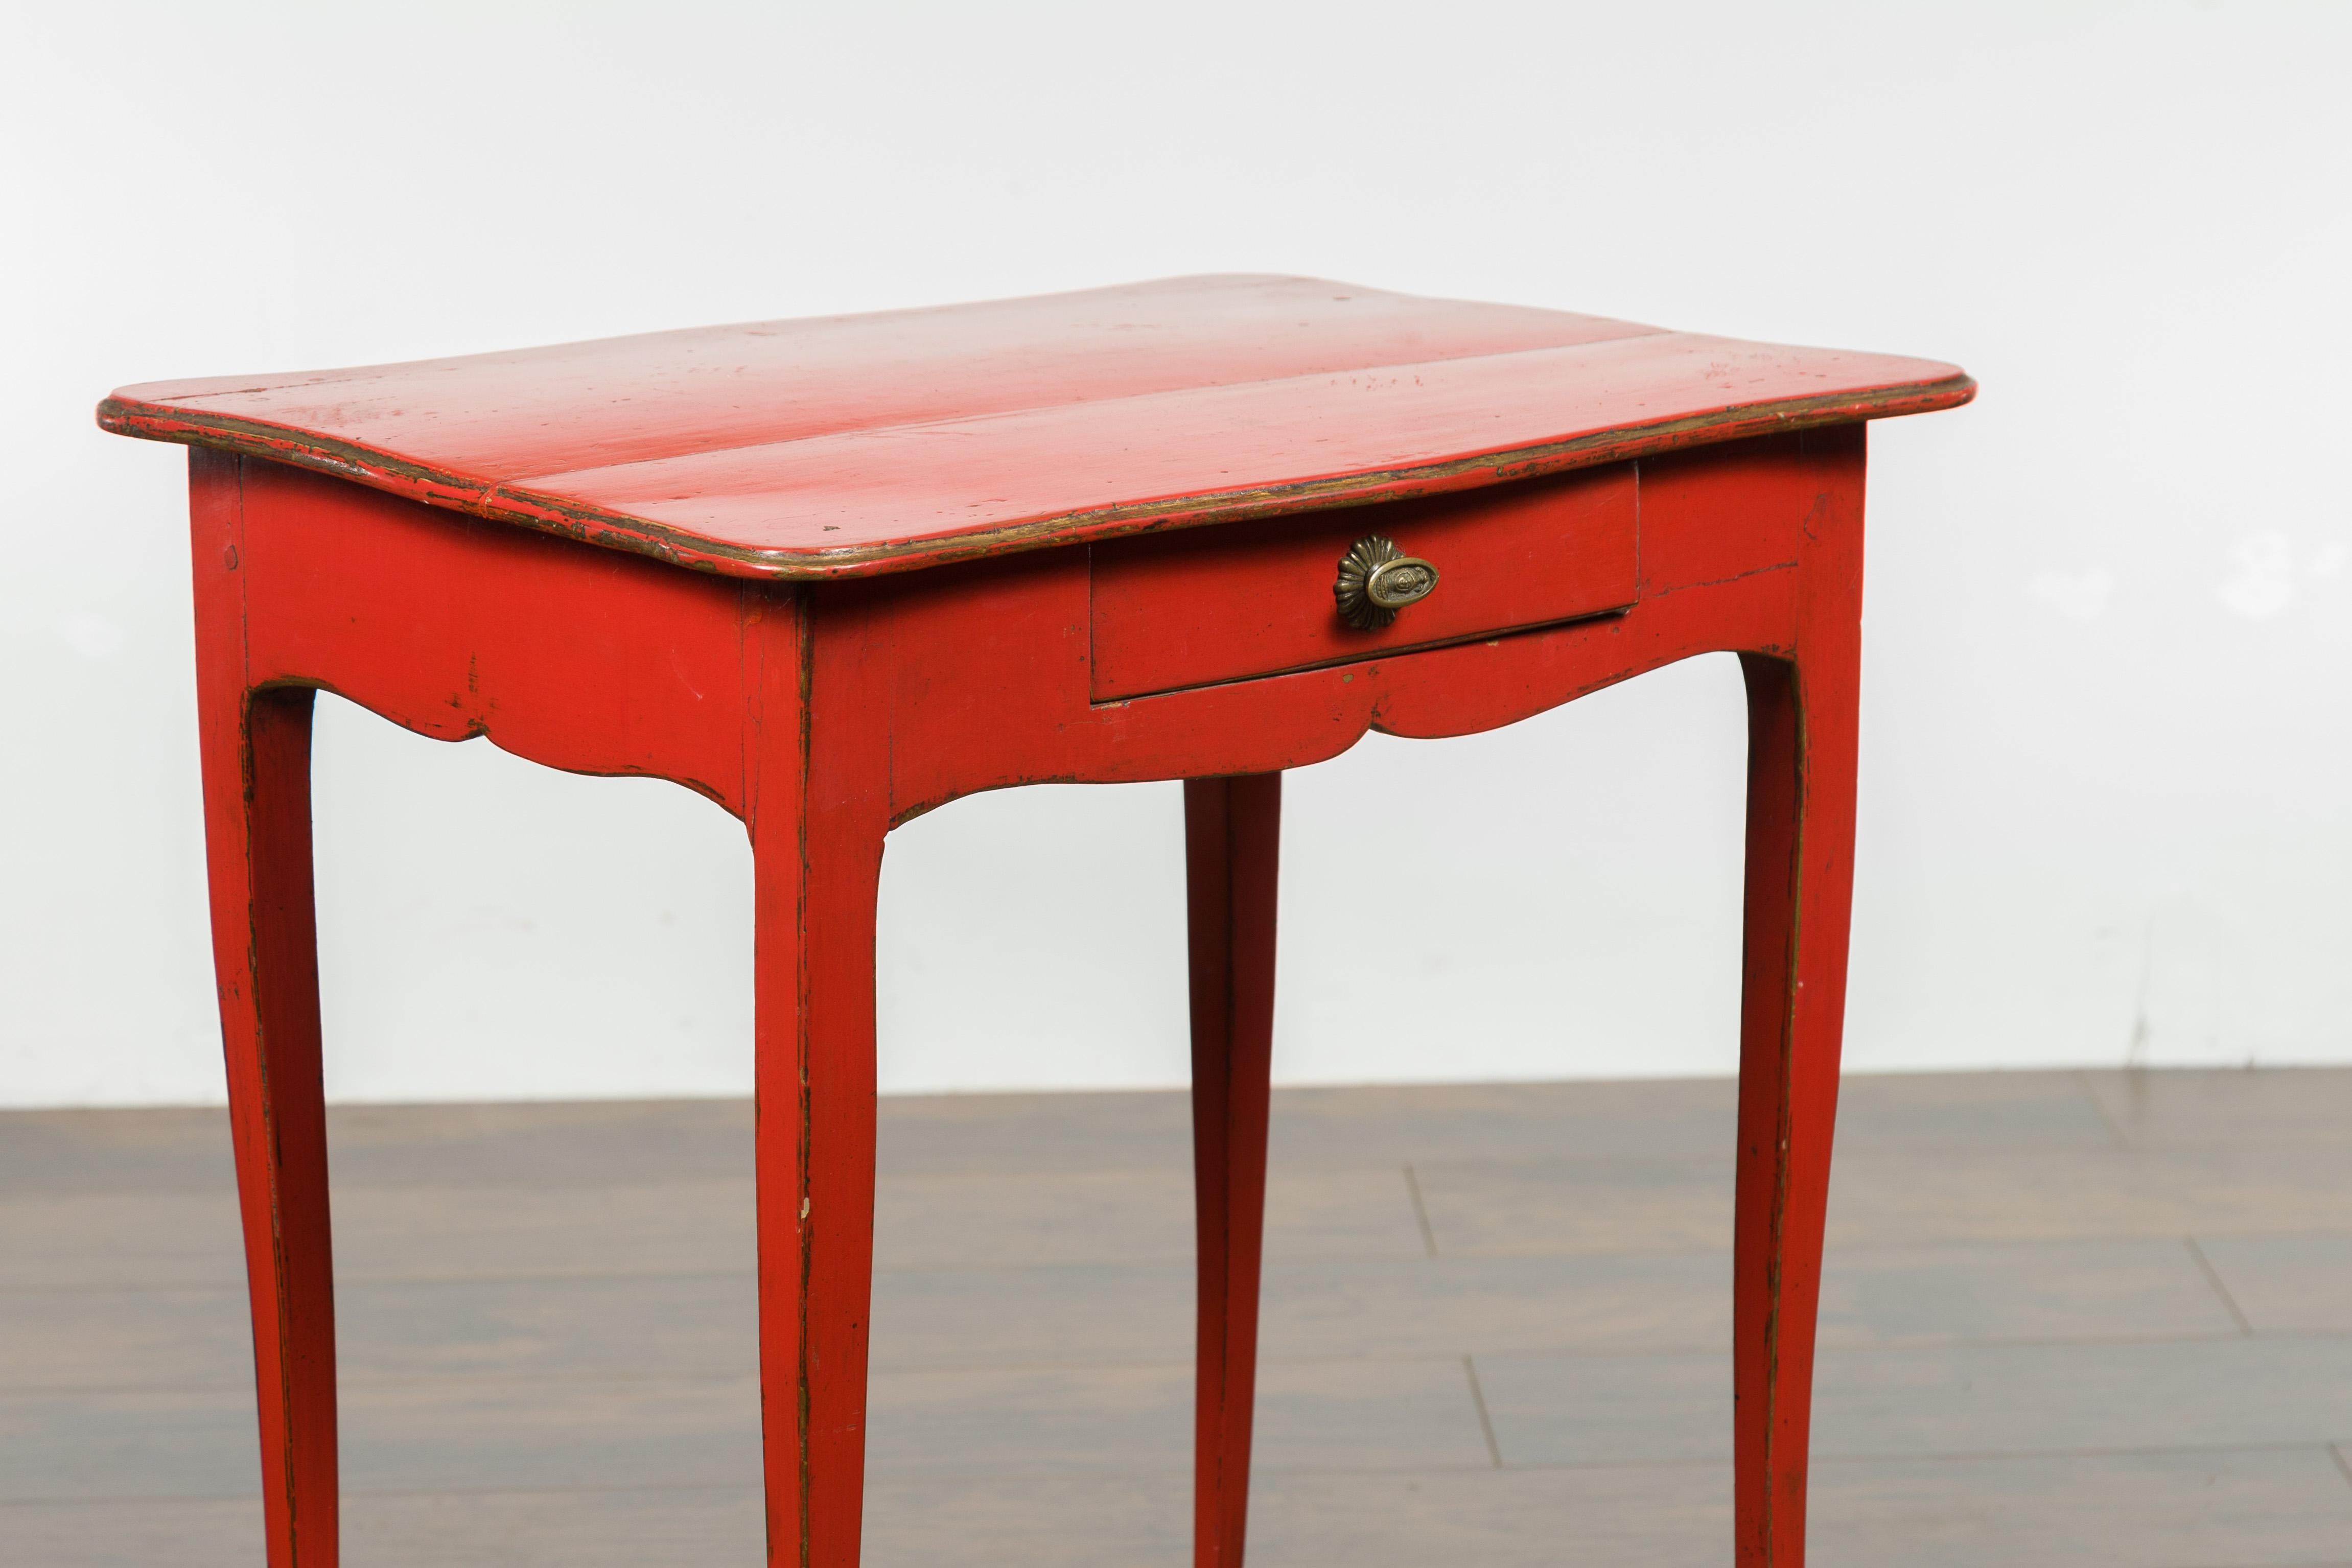 French 1820s Restauration Period Red Side Table with Serpentine Top and Drawer For Sale 6